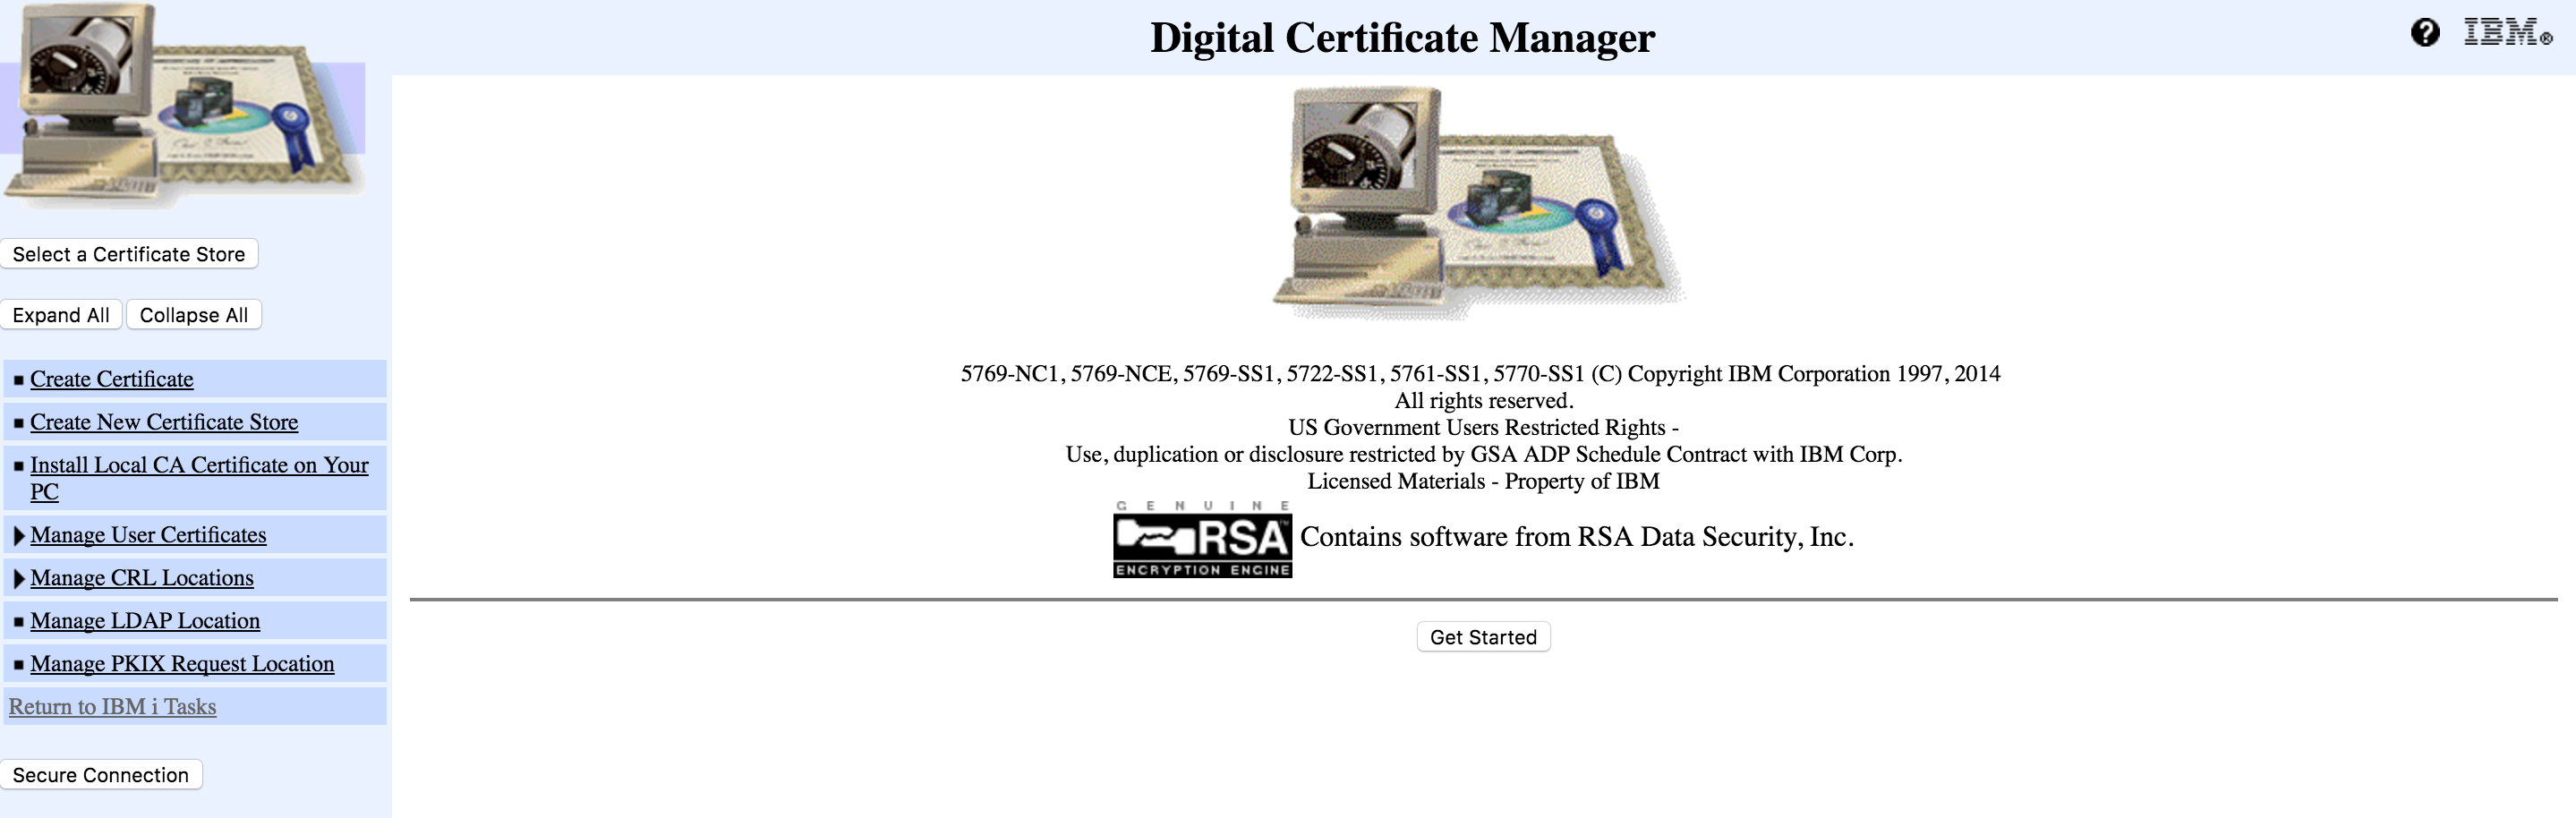 Digital Certificate Manager Main Page